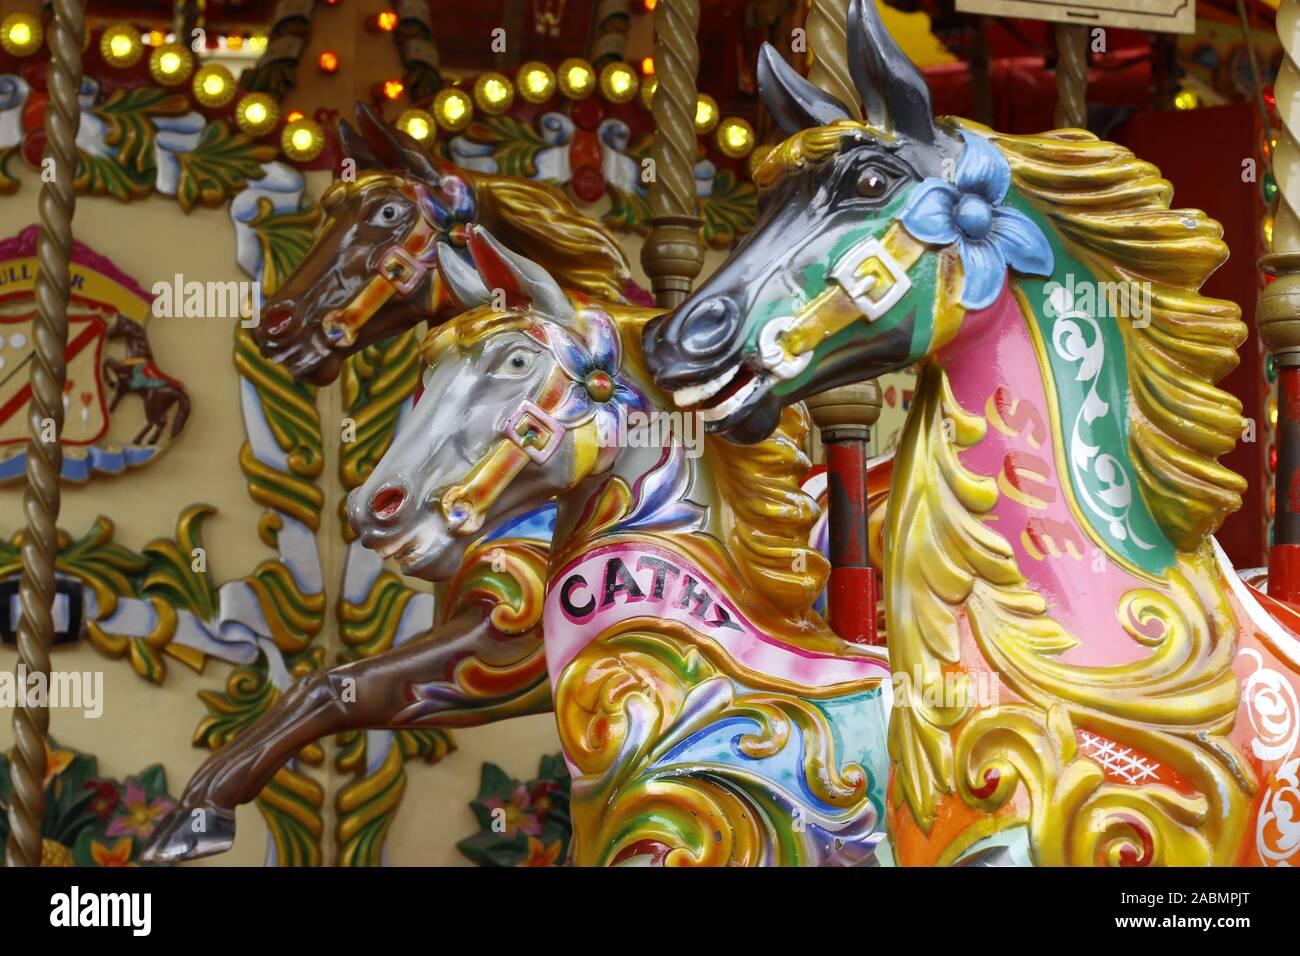 merry go round or carousel at a fairground showing detail of brightly painted horses etc Stock Photo